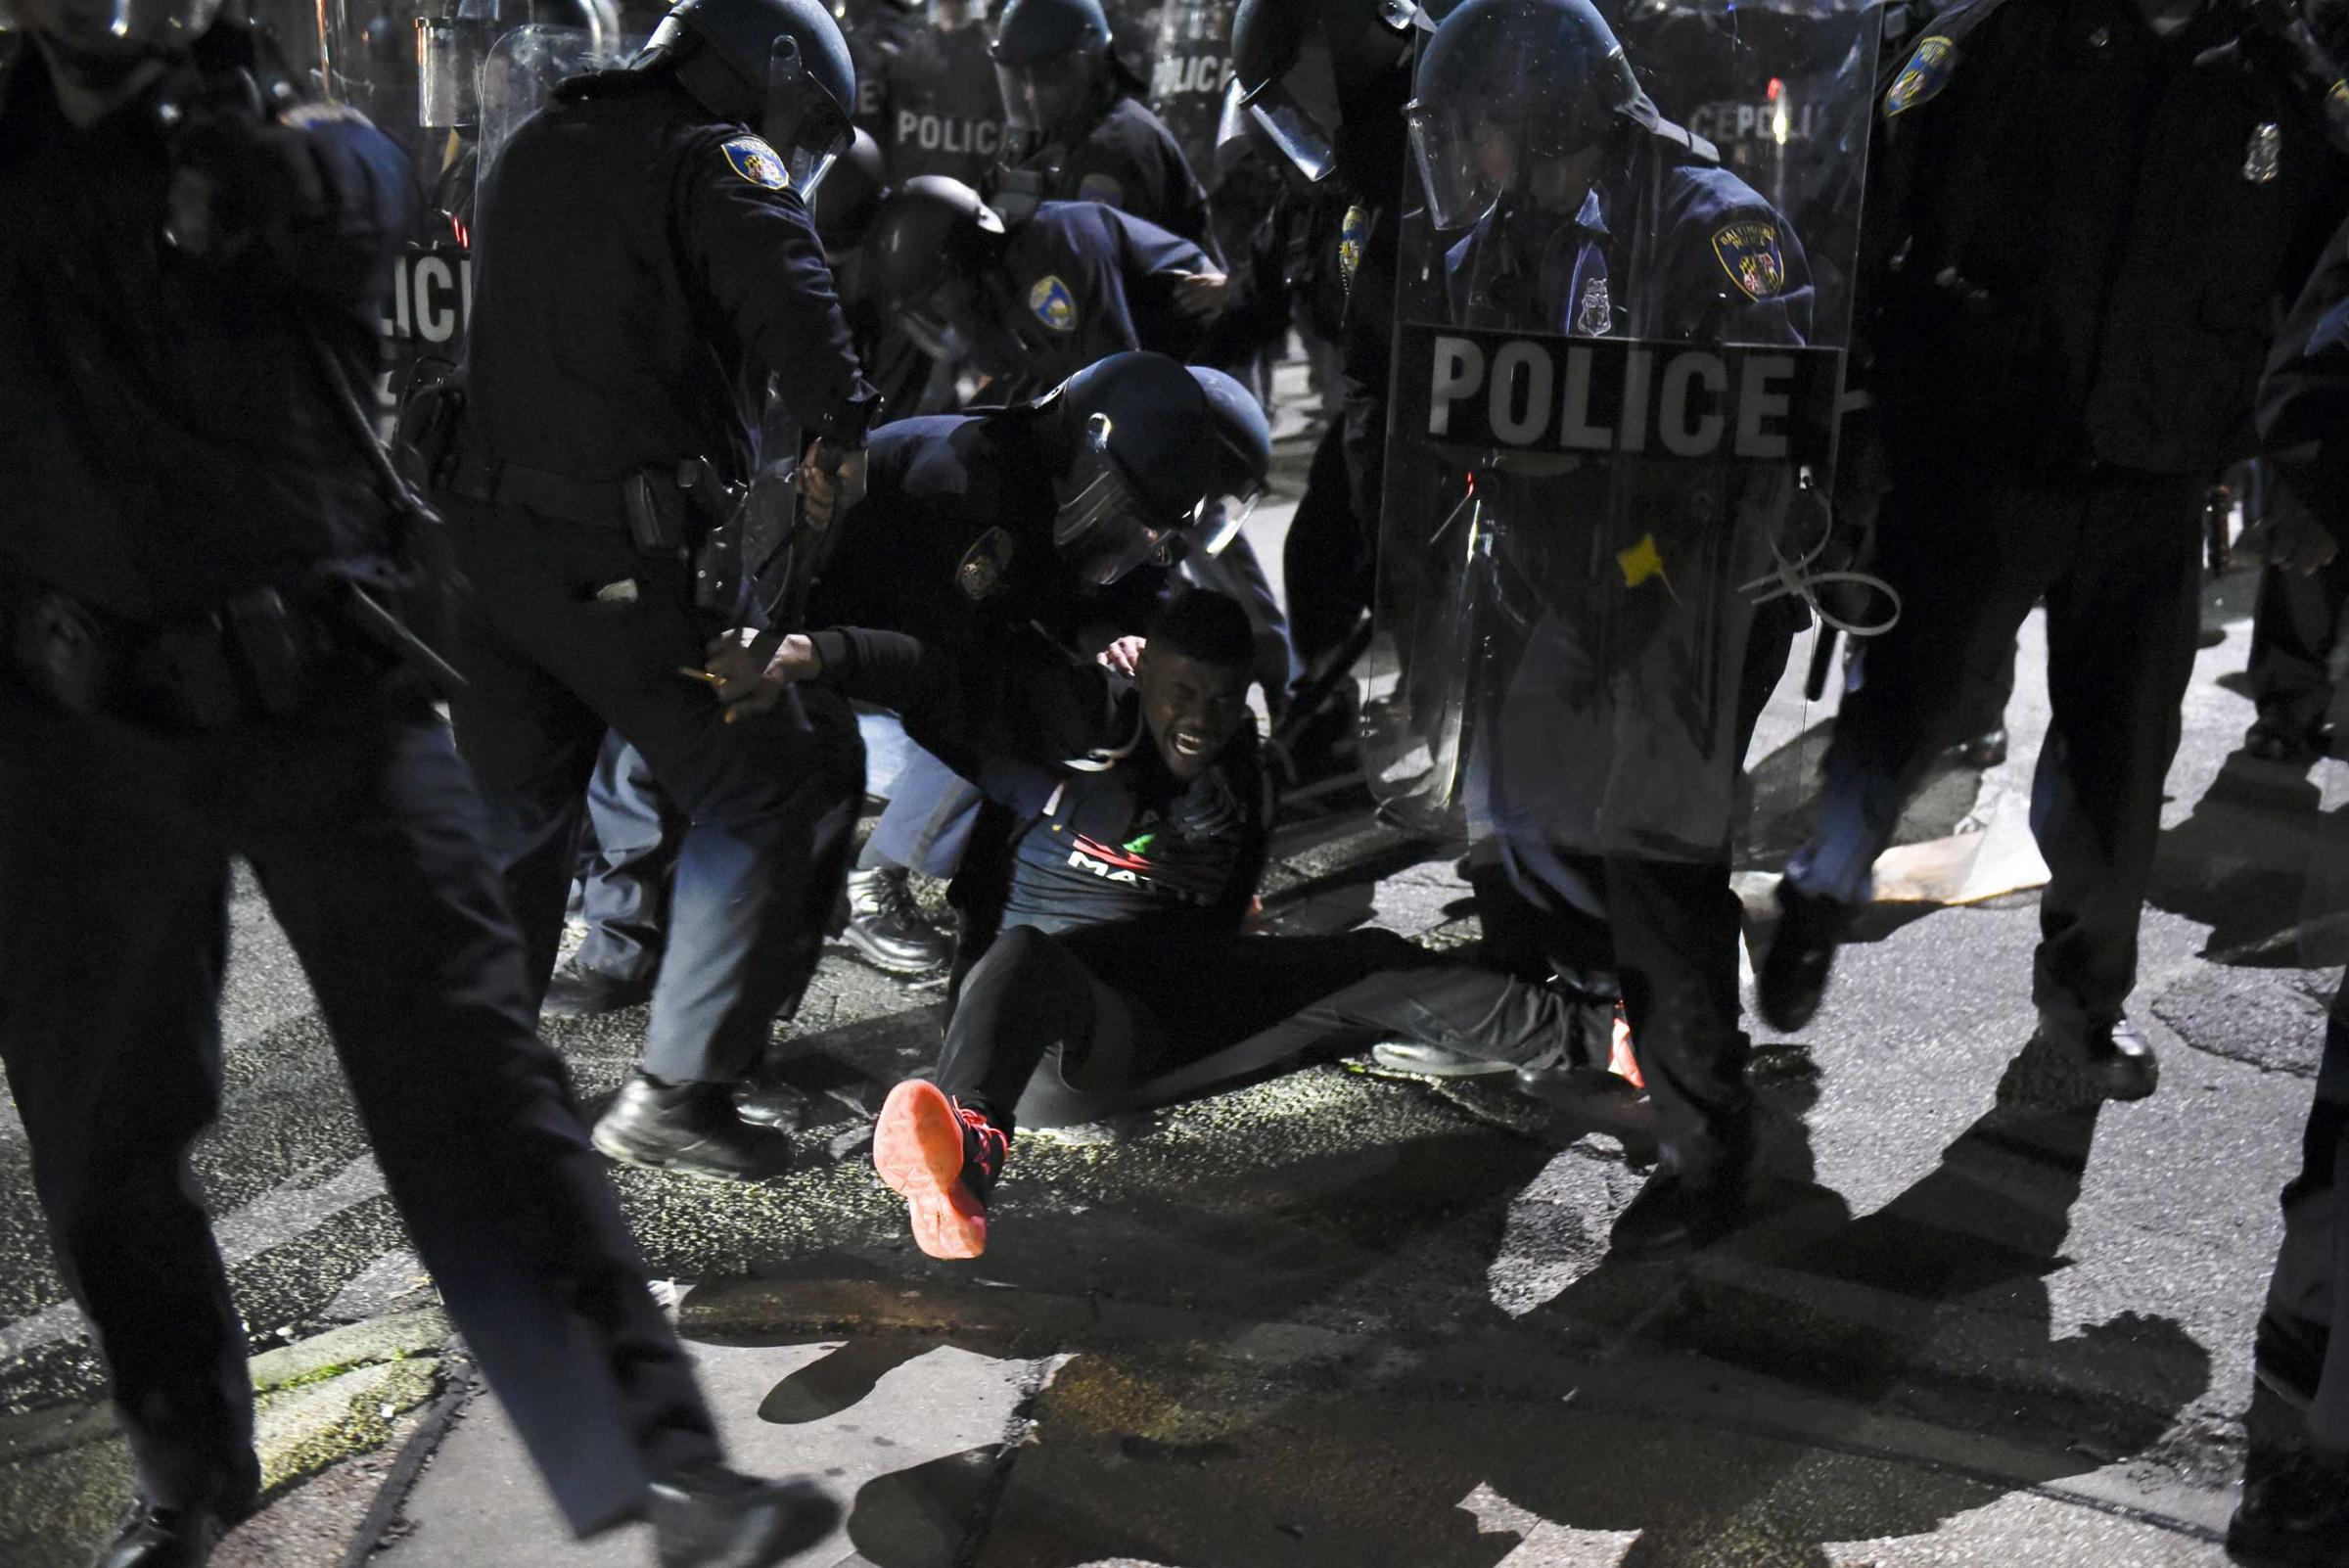 Law enforcement officers detain a demonstrator on Gilmore Avenue near Baltimore Police Department Western District during a protest against the death of Freddie Gray in police custody, in Baltimore on April 25, 2015.